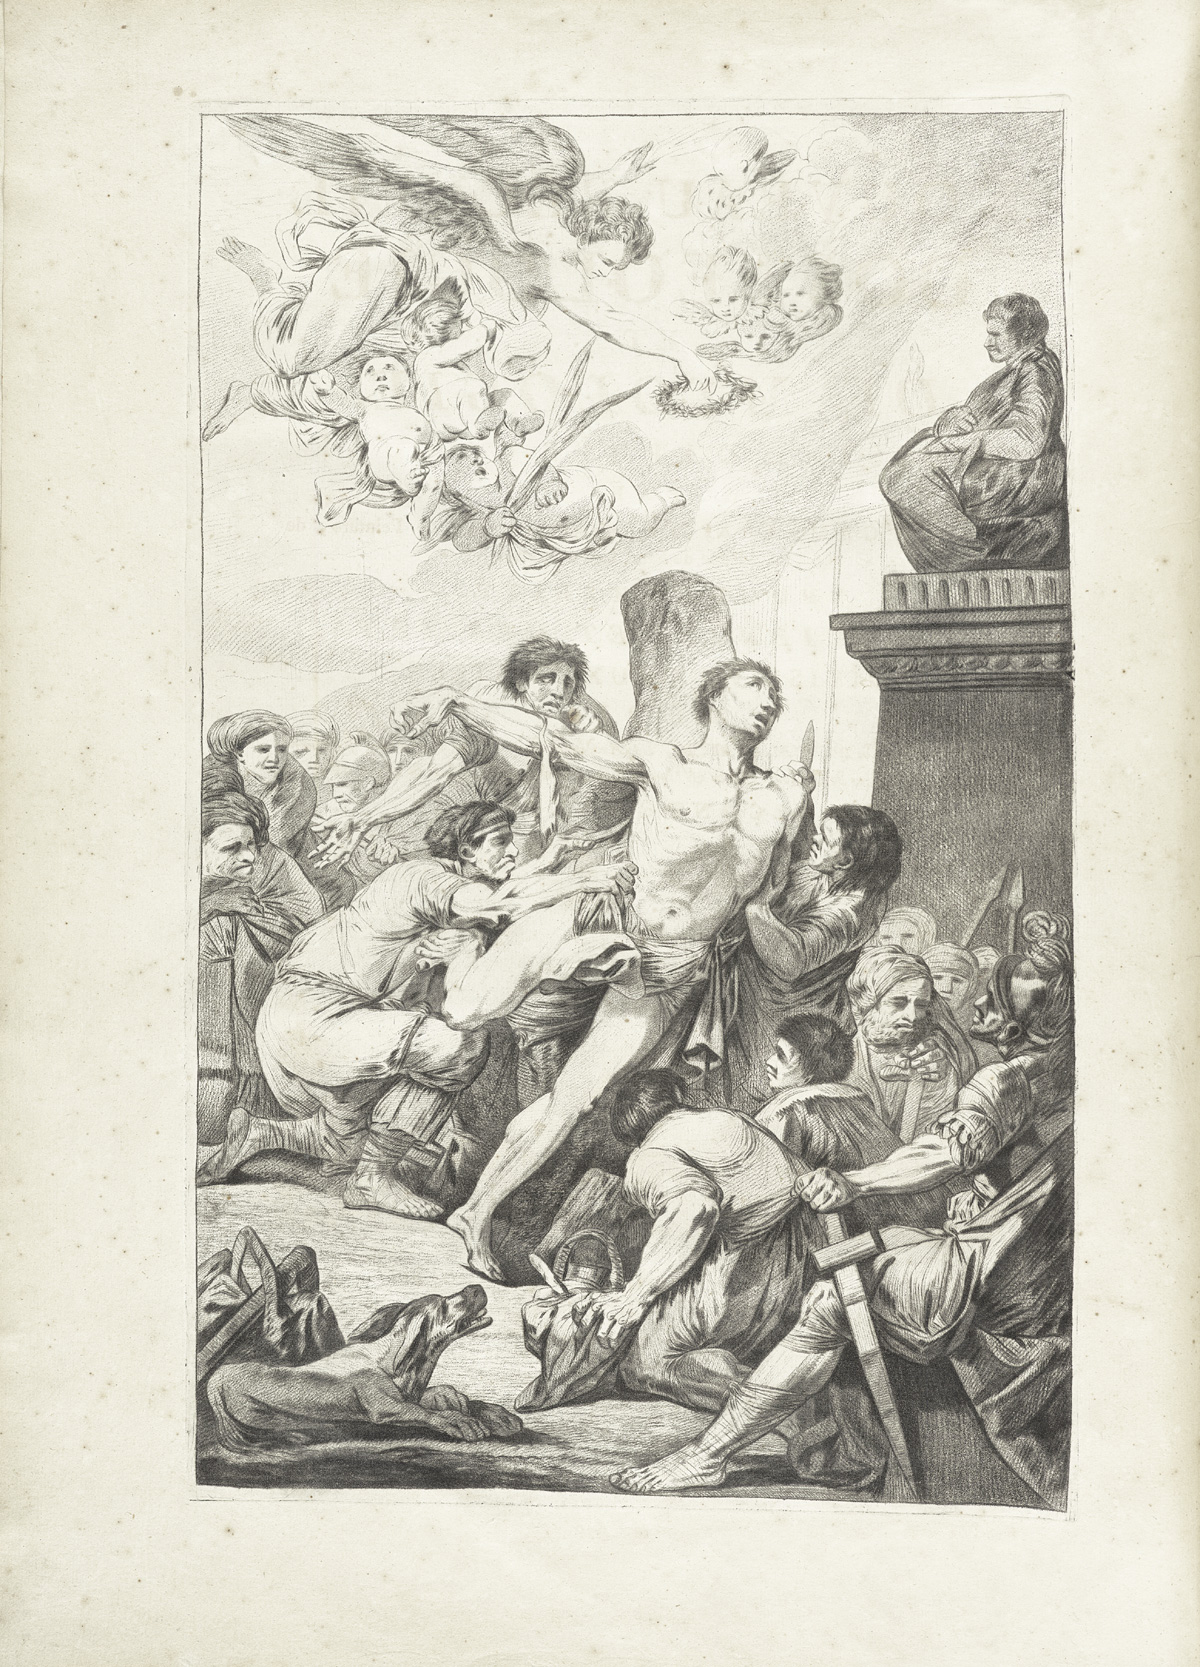 Etched engraved frontispiece of Saint Bartholomew about to be flayed by a crowd; Bartholomew is held down struggling by three men, one with a flaying knife in the center of the page, with male and female onlookers on all sides and a Classical temple to the right; above flies a large angel with six cherubs in attendance; from Jacques Gamelin’s Nouveau recueil d’osteologie et de myologie, NLM Call no.: WZ 260 G178m 1779.